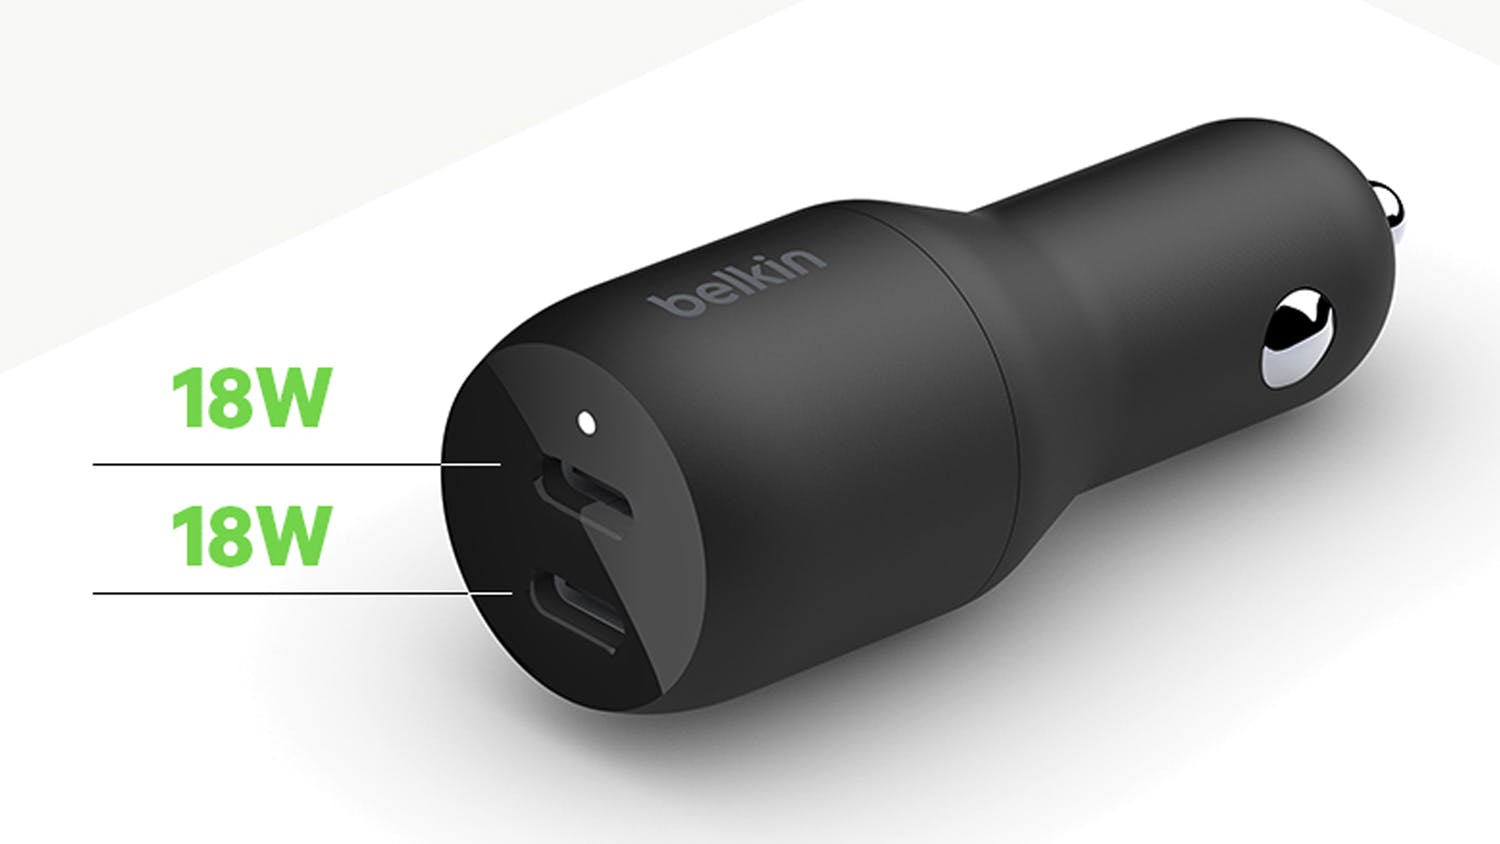 Belkin Boost Up Charge Dual USB-C 36W Car Charger